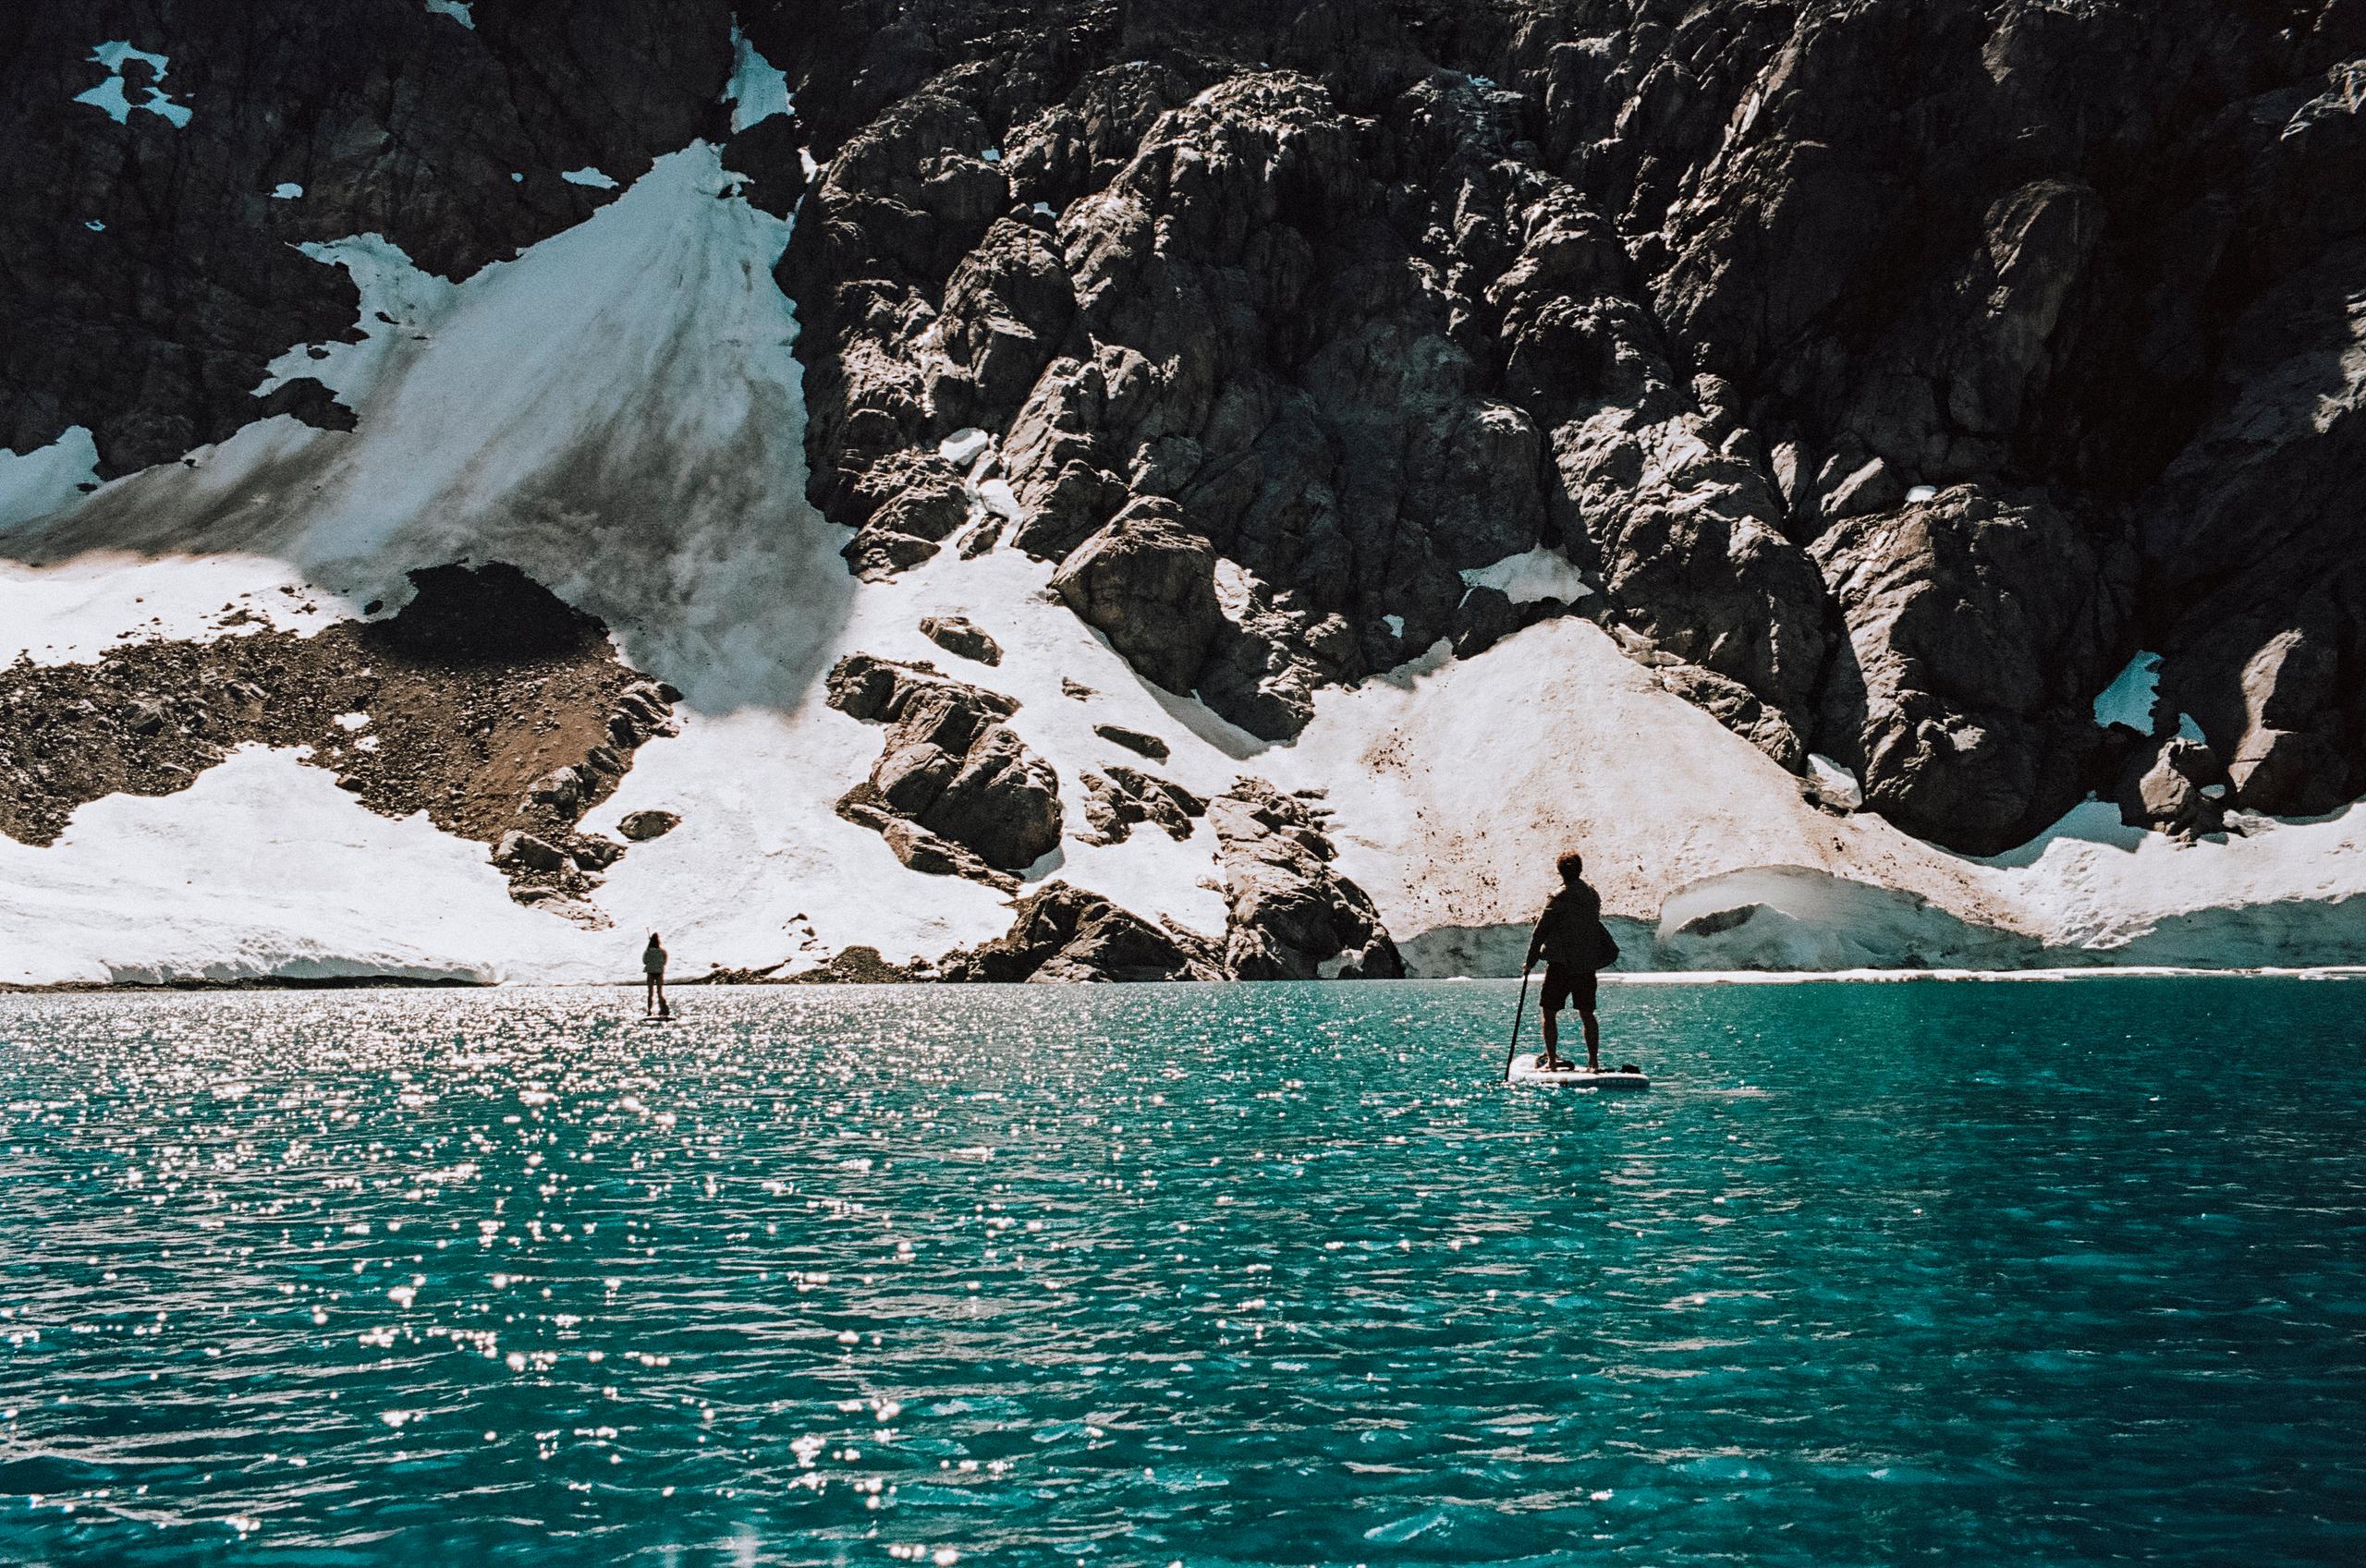  Two people standup paddleboarding on the lake in Patagonia.